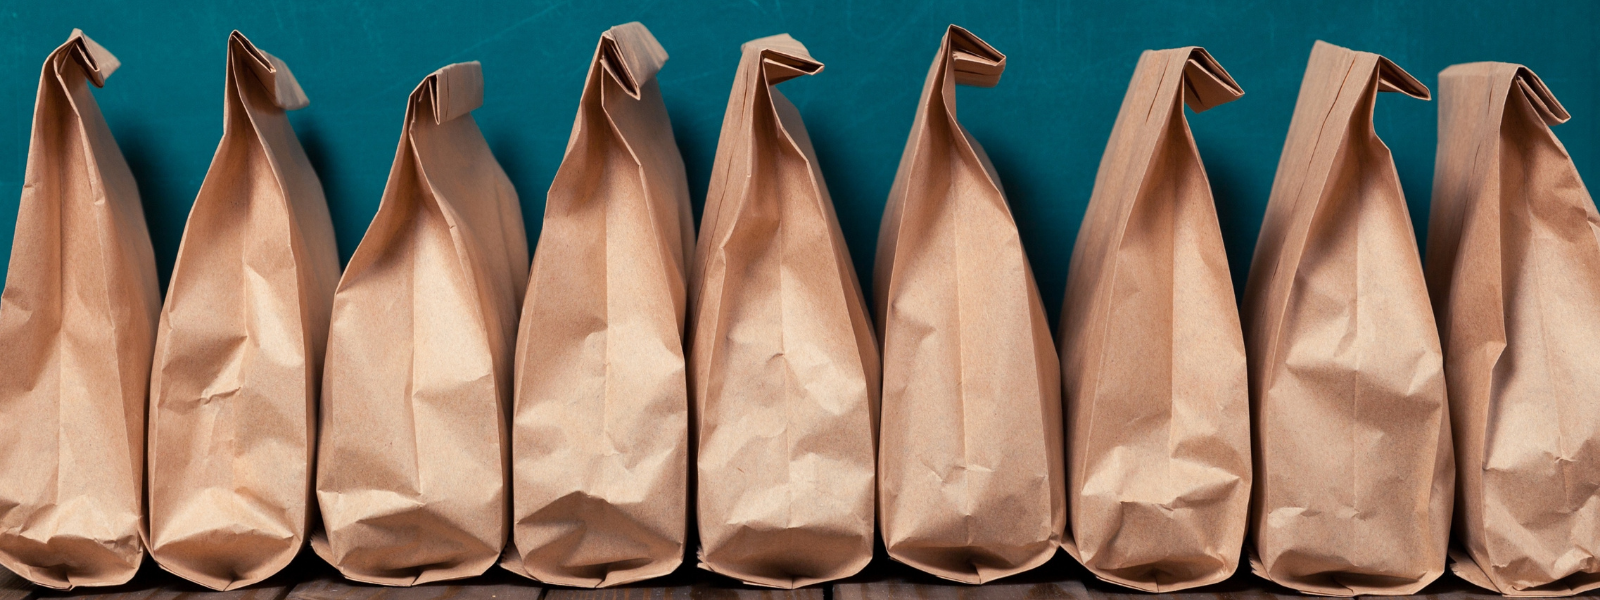 Bagged lunches lined up in a row.